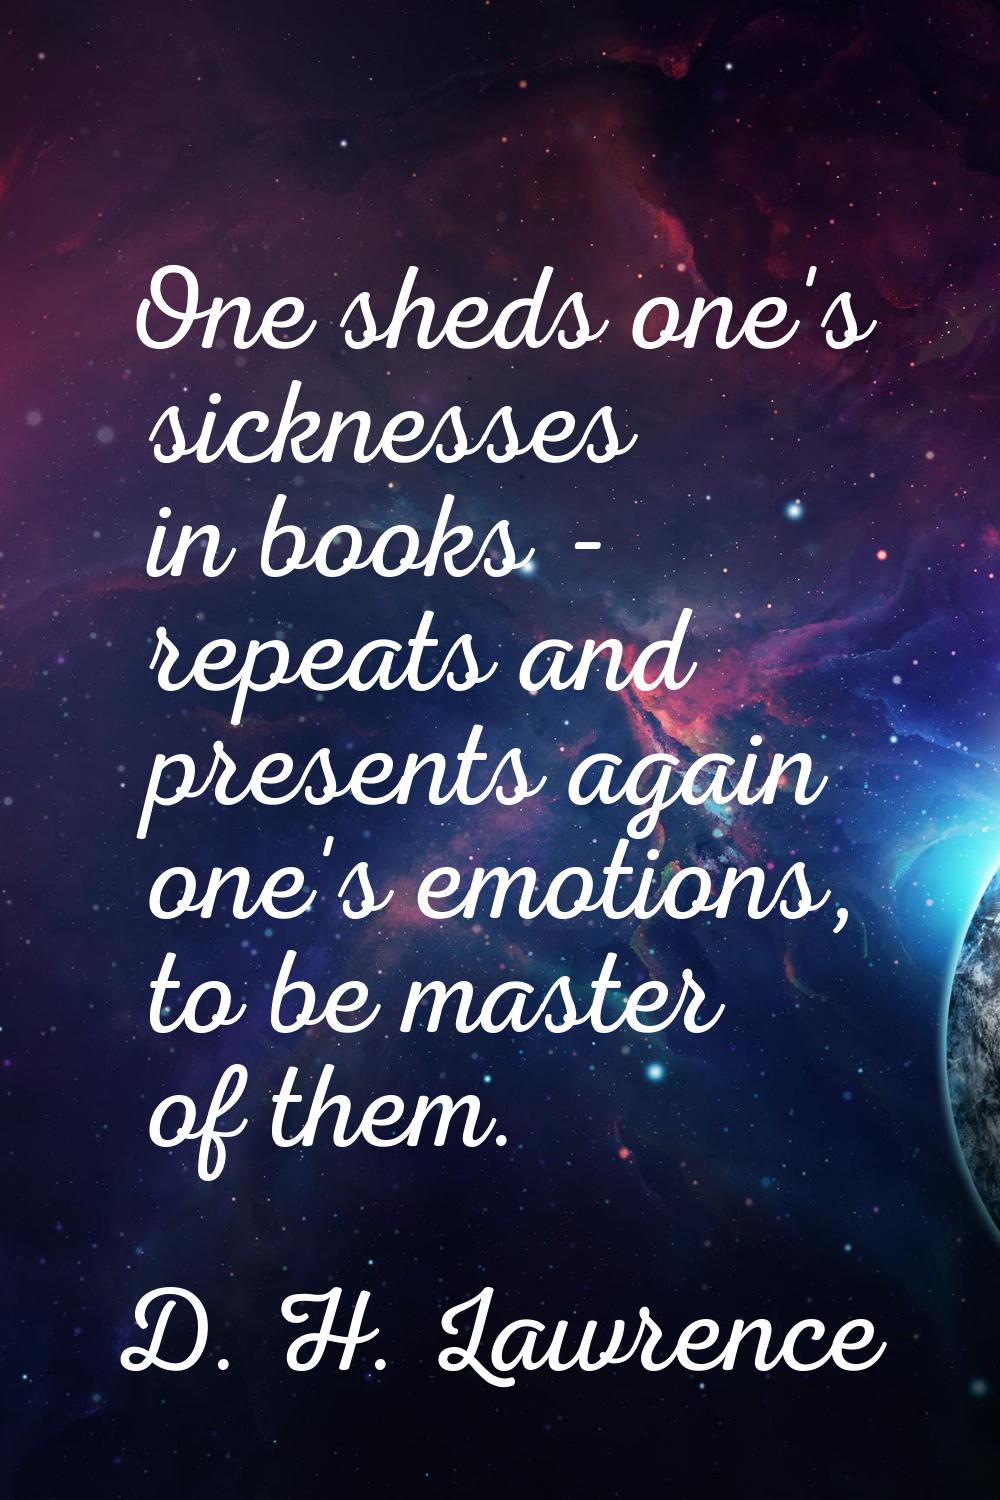 One sheds one's sicknesses in books - repeats and presents again one's emotions, to be master of th